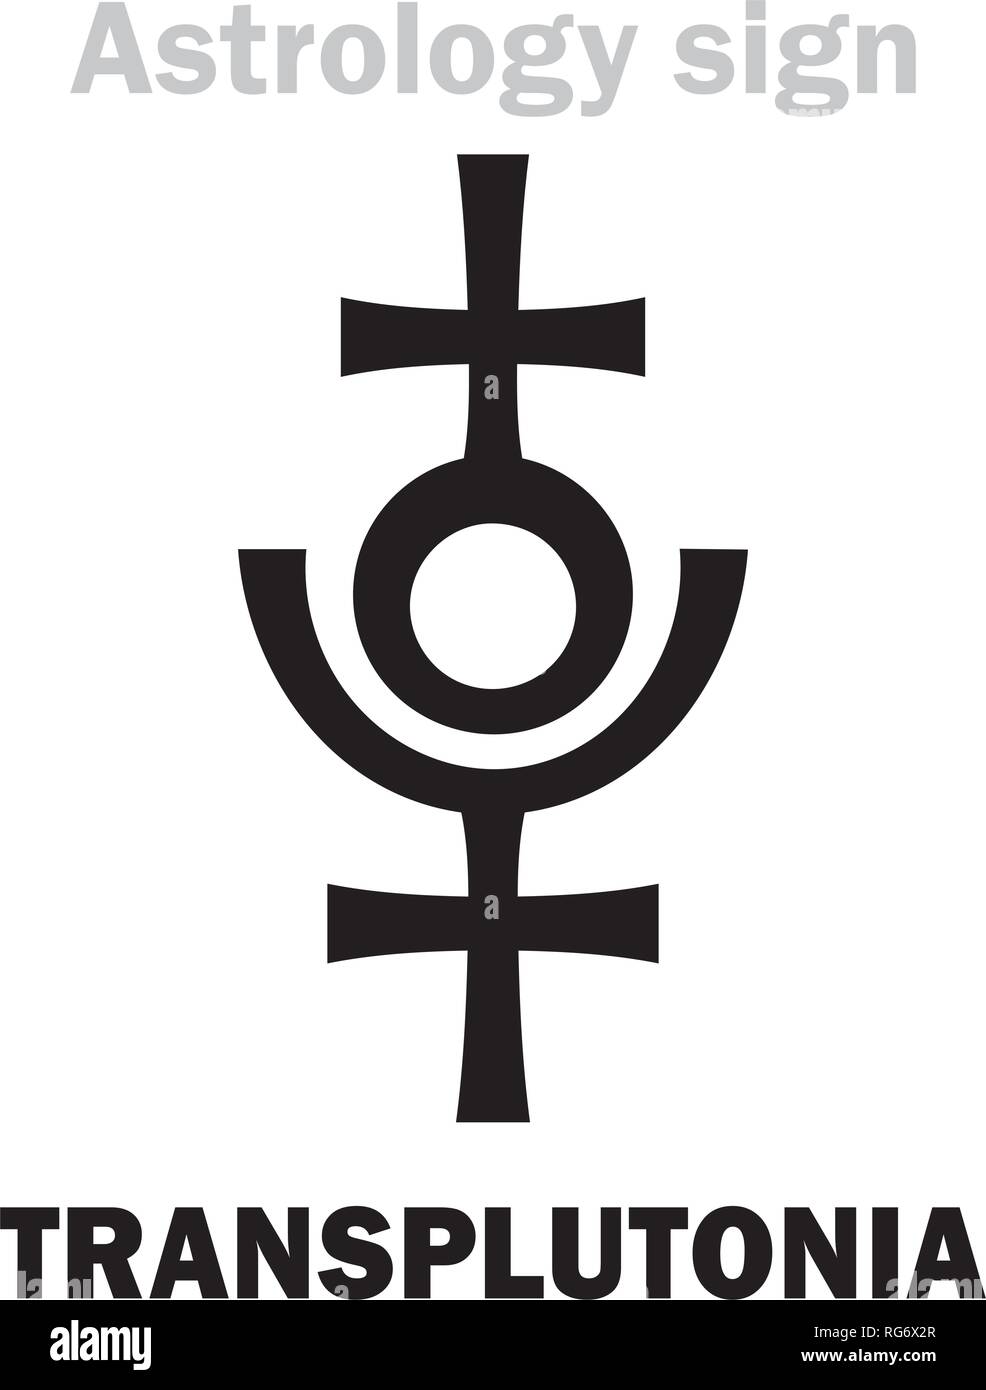 Astrology Alphabet: TRANSPLUTONIA (Planet X, Proserpina/Persephone, 12th hypothetical planet in the Solar System, beyond Pluto). Hieroglyphics sign. Stock Vector